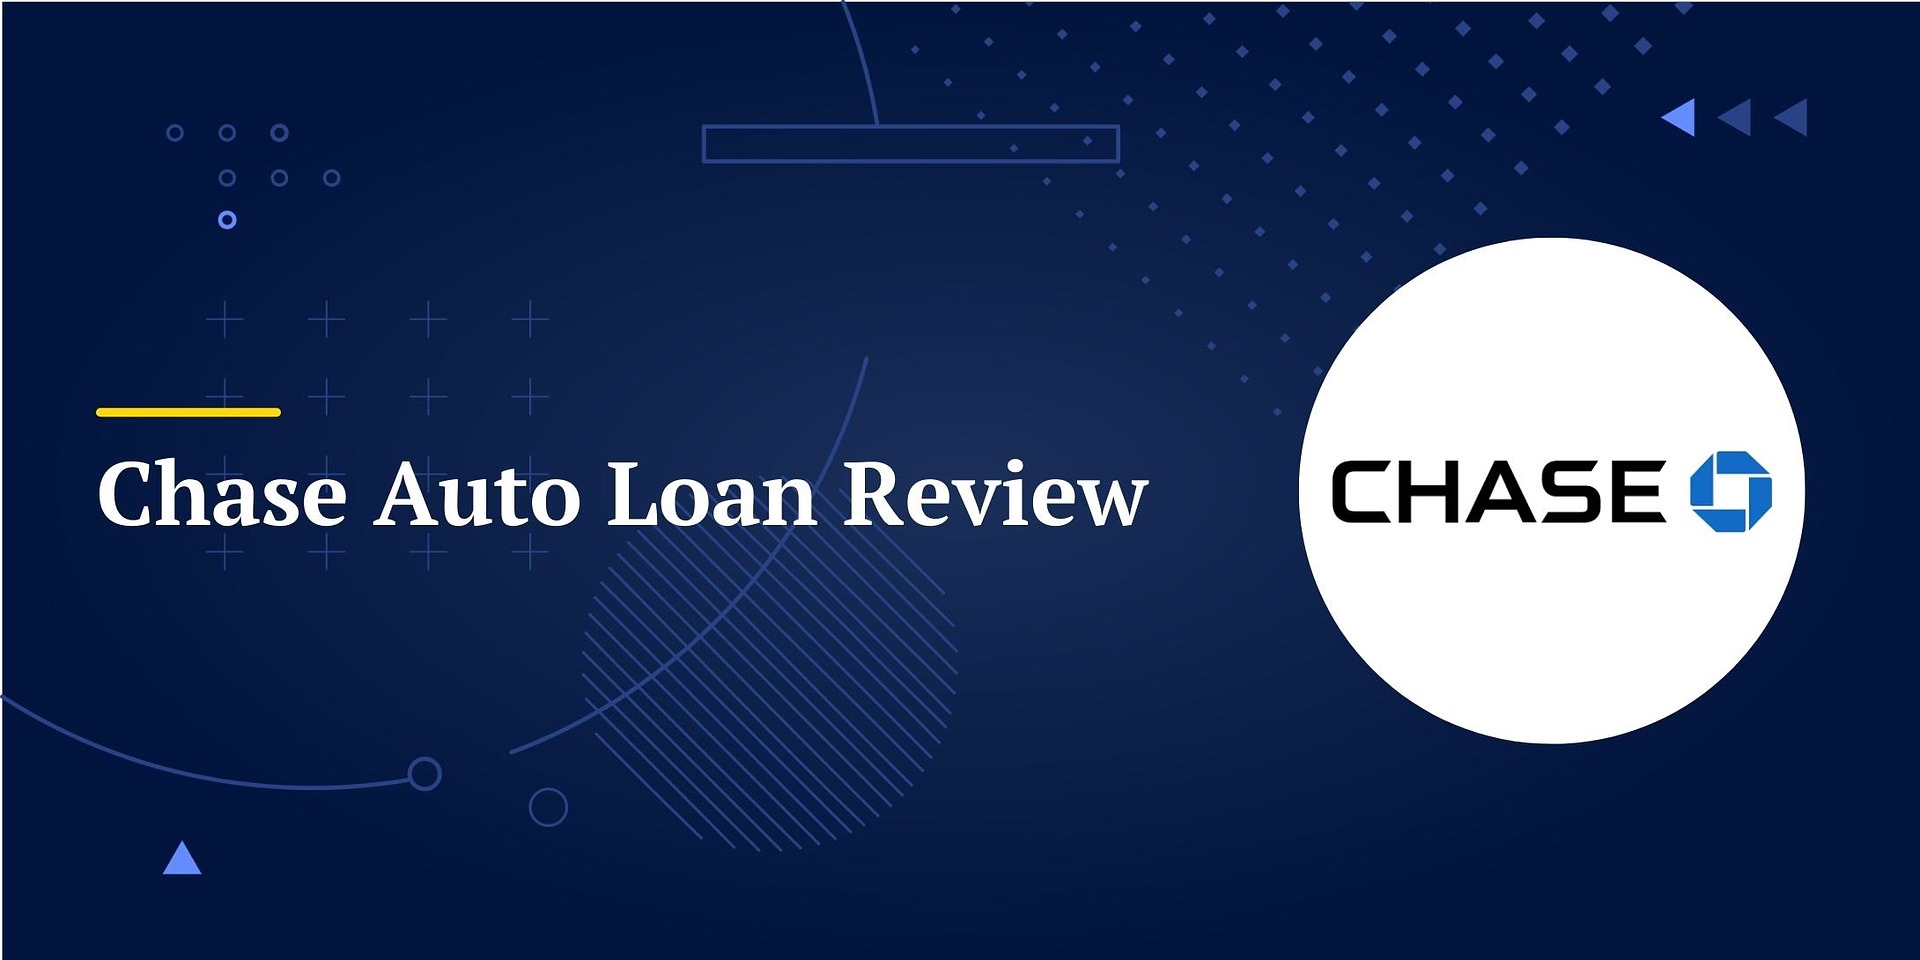 What Is The Chase Auto Loan Grace Period?